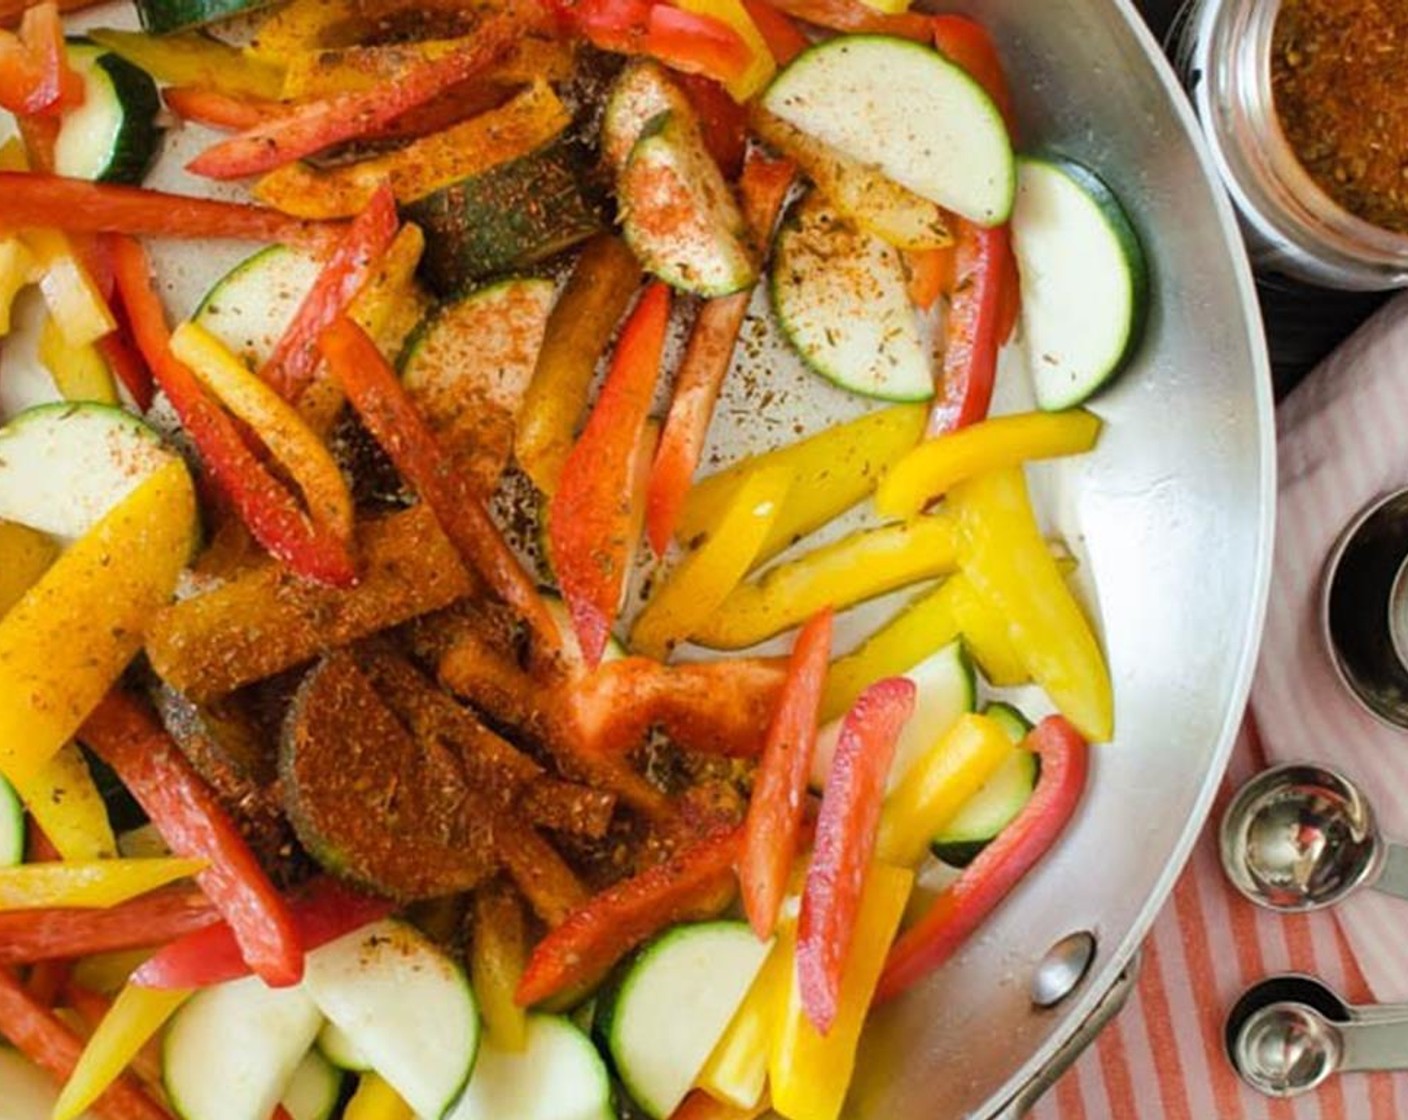 step 4 In a large skillet, heat Canola Oil (as needed) over medium-high heat. Add the Red Bell Pepper (1), Yellow Bell Pepper (1), Zucchini (1), and sauté for 1-2 minutes.